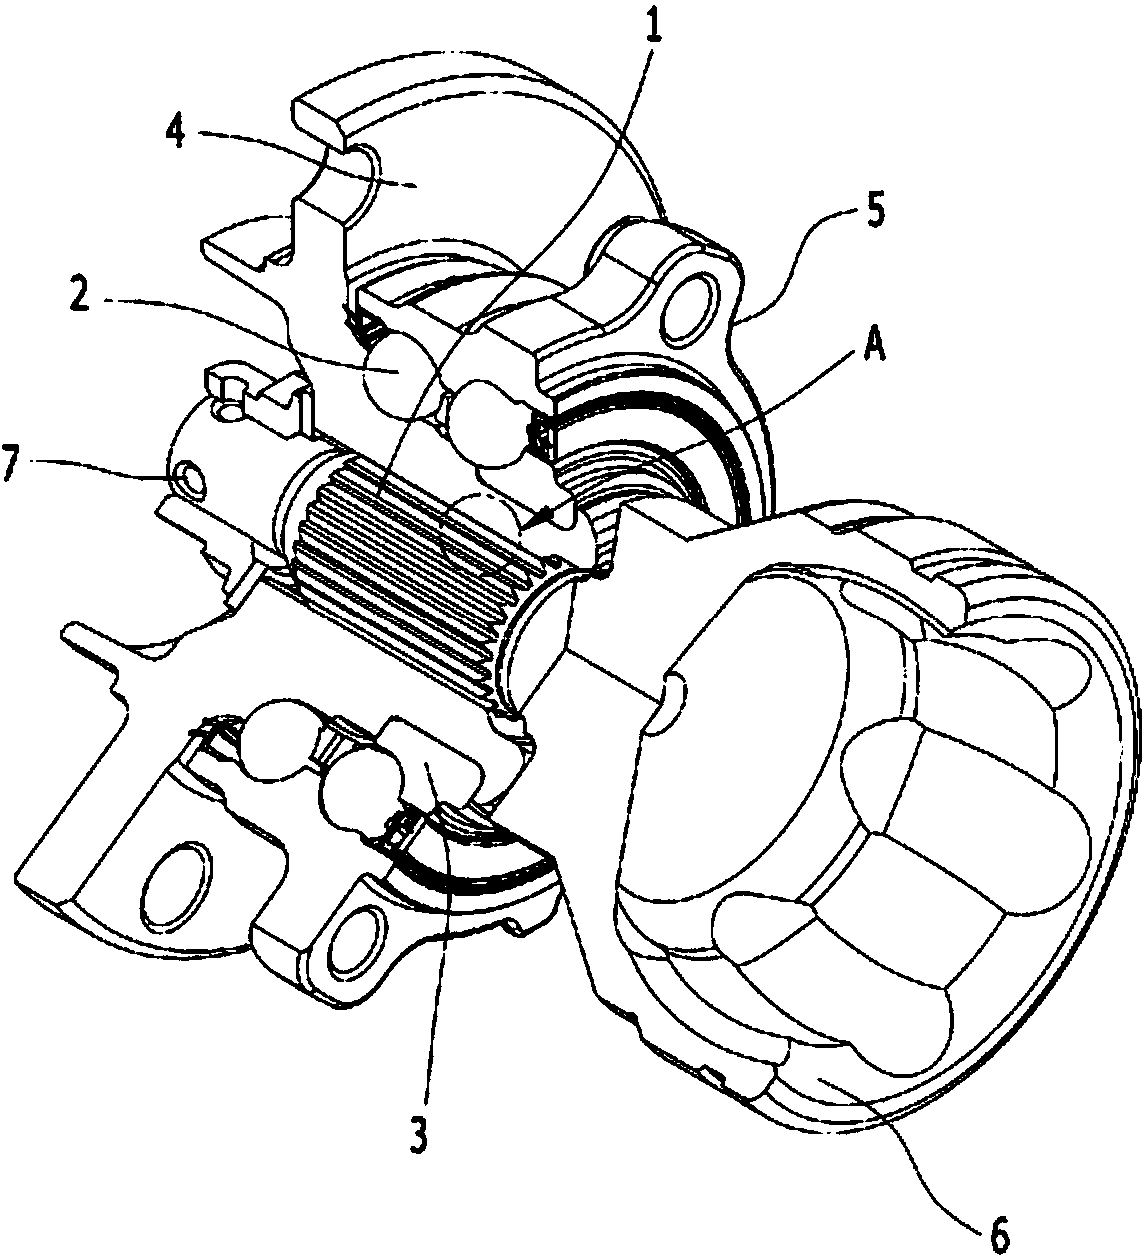 Structure and method for coupling wheel bearings